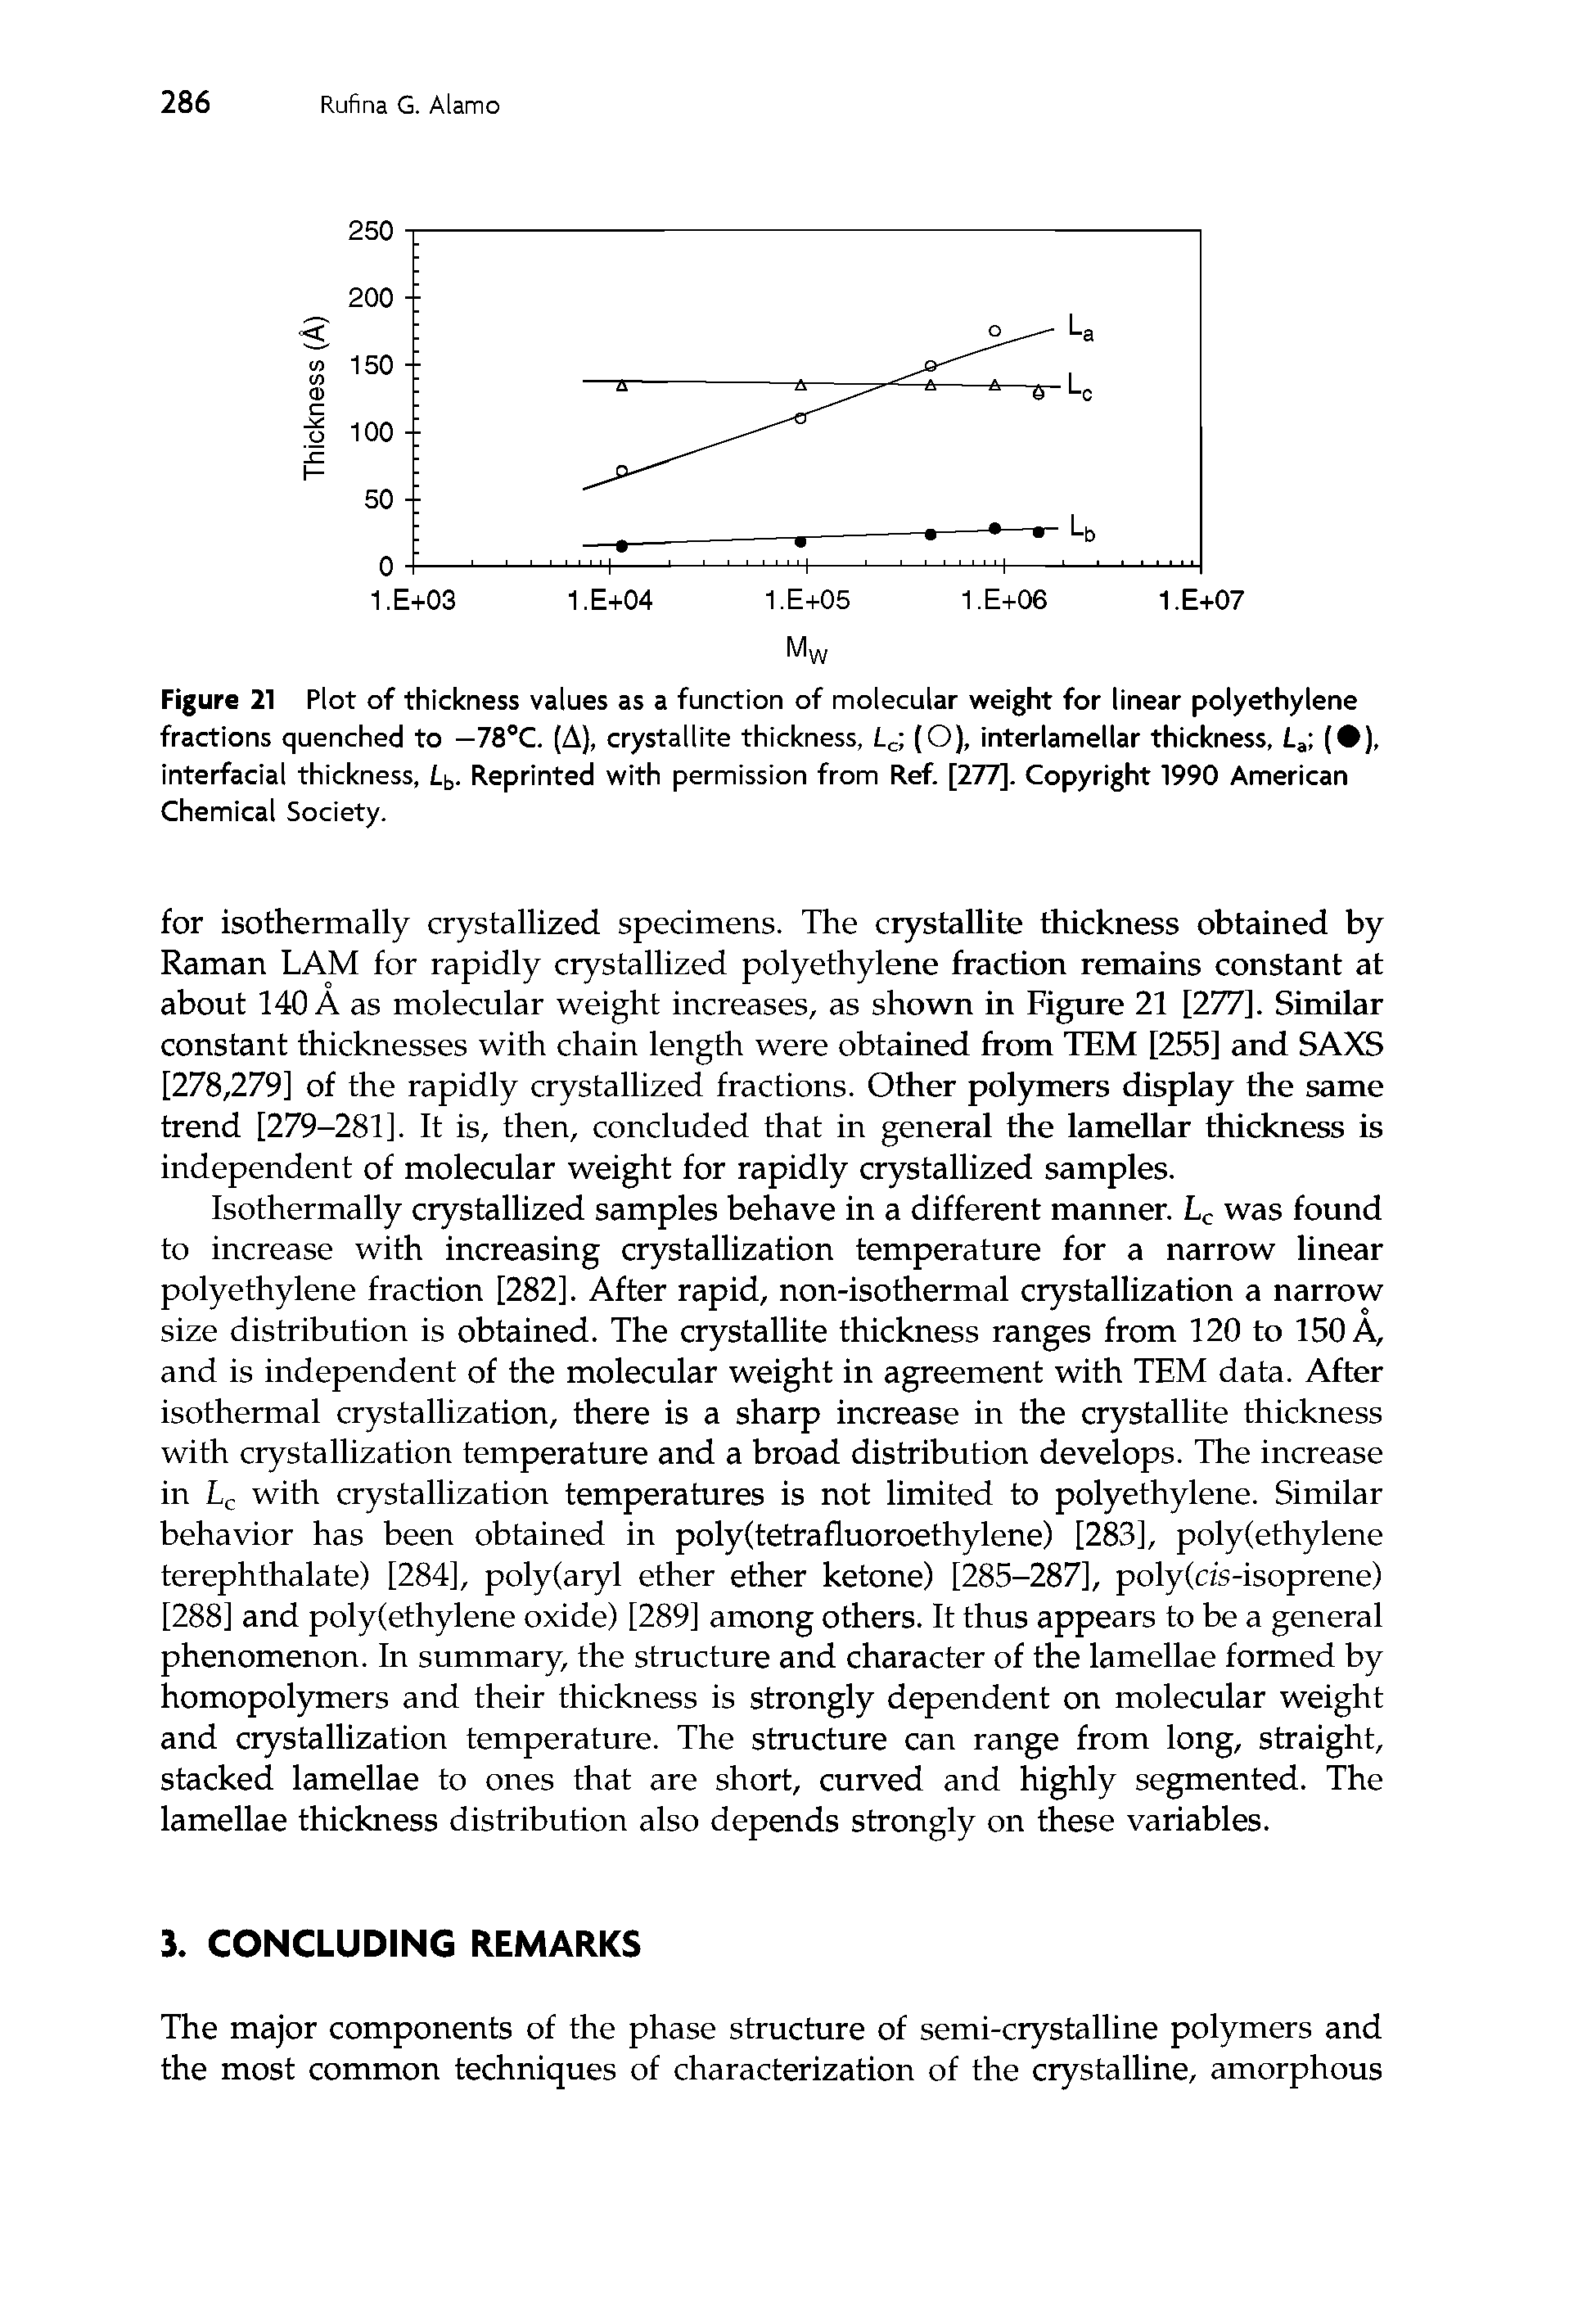 Figure 21 Plot of thickness values as a function of molecular weight for linear polyethylene fractions quenched to —78°C. (A), crystallite thickness, Lc (O), interlamellar thickness, La ( ), interfacial thickness, Lb. Reprinted with permission from Ref. [277]. Copyright 1990 American Chemical Society.